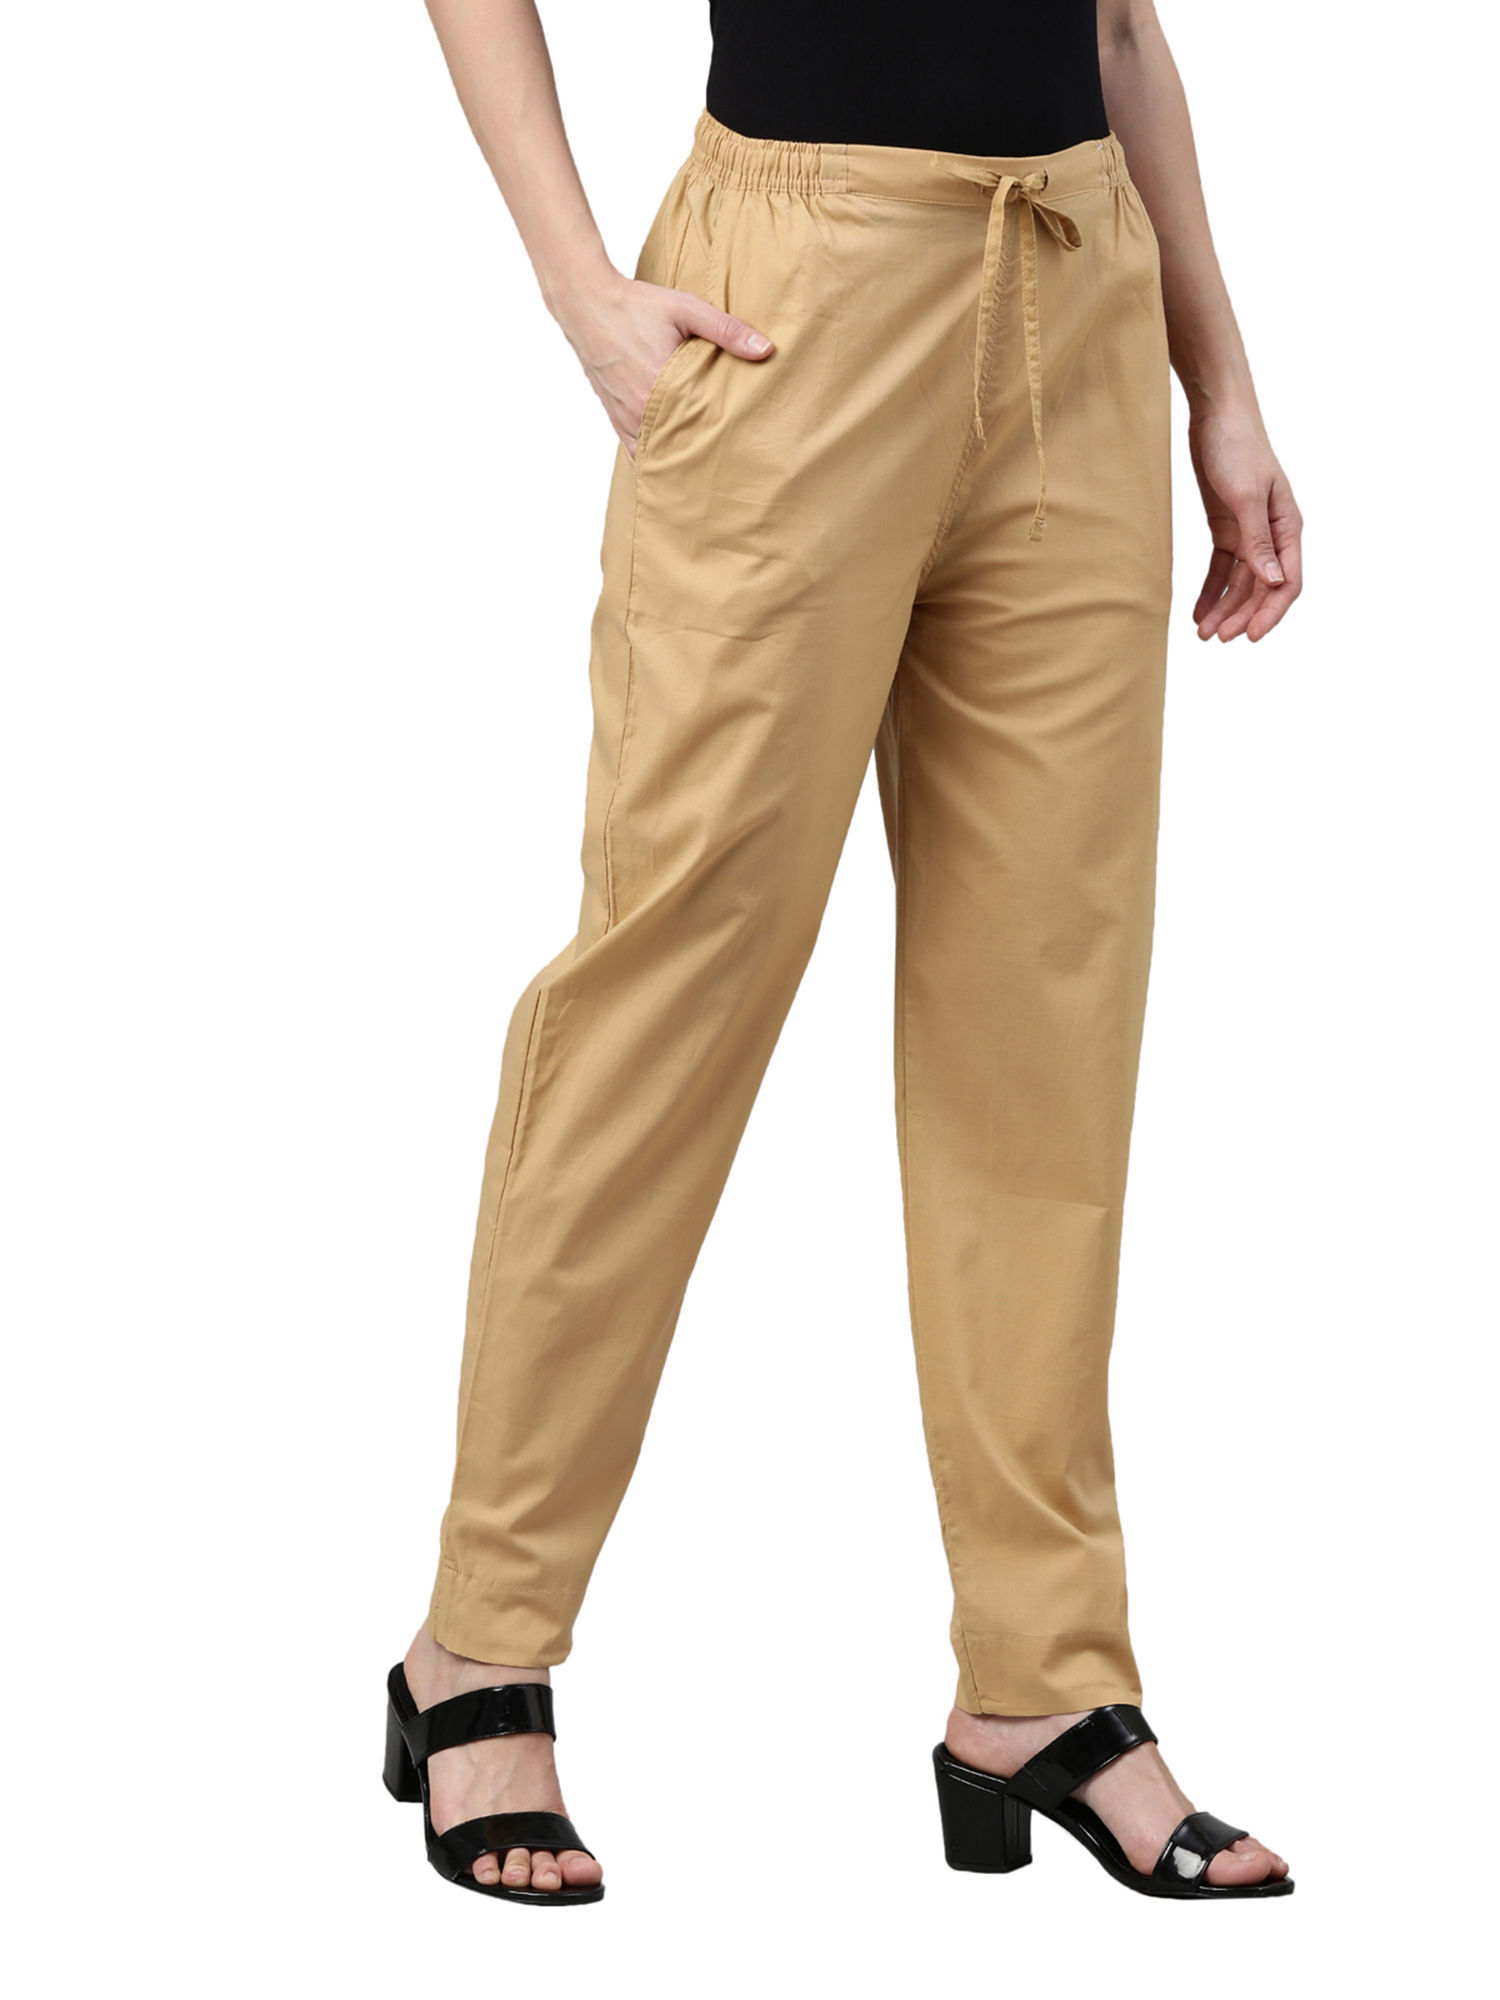 Ladies Cotton Pants, Size : Small, Medium, Large, Packaging Type : Poly Bag  at Rs 450 / Piece in Delhi